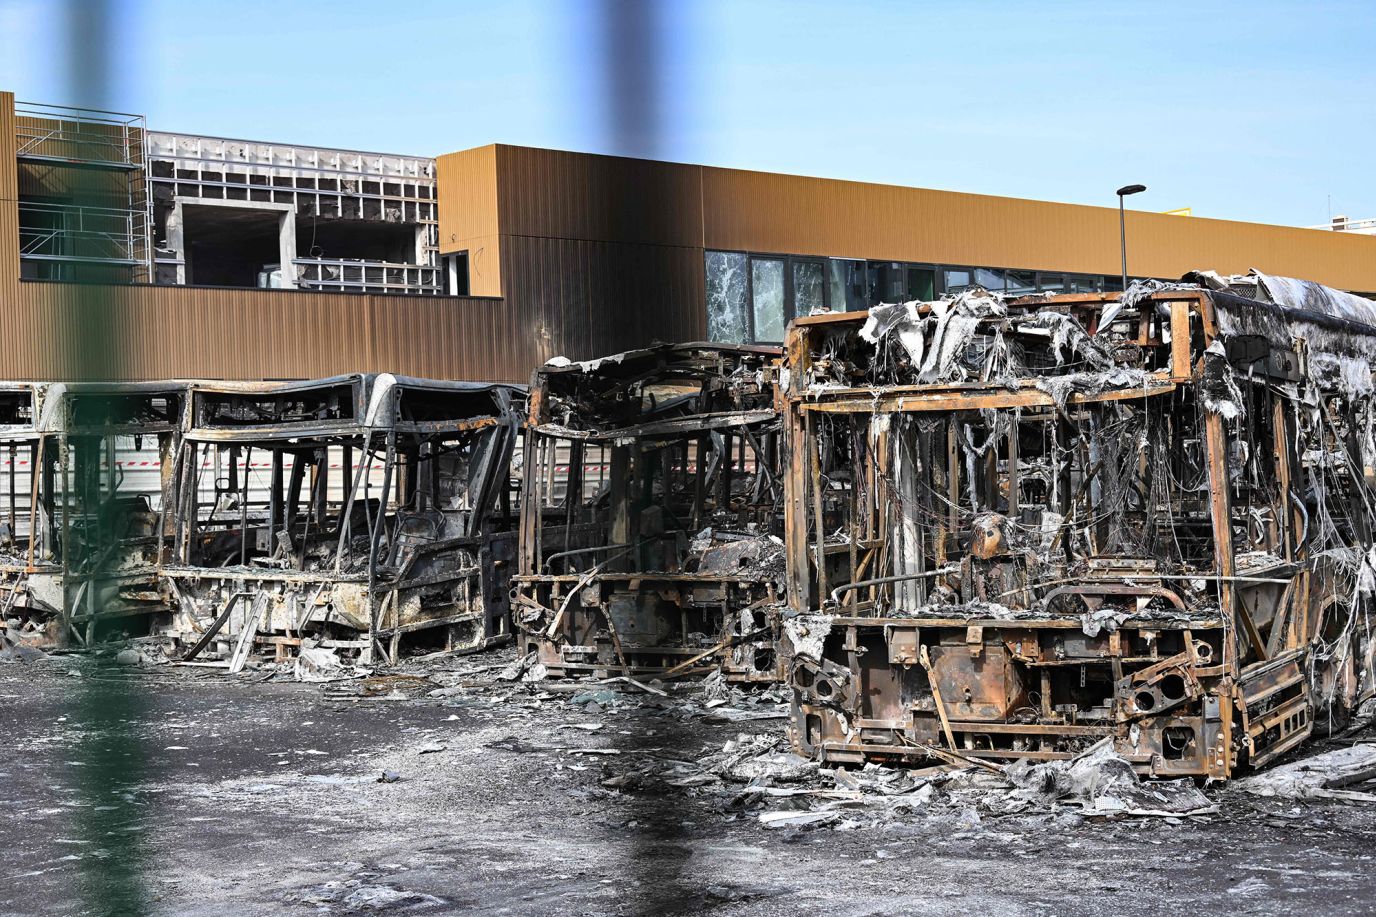 Burnt buses can be seen through the gates at the Fort d'Aubervilliers bus terminal in Aubervilliers, France, on June 30.